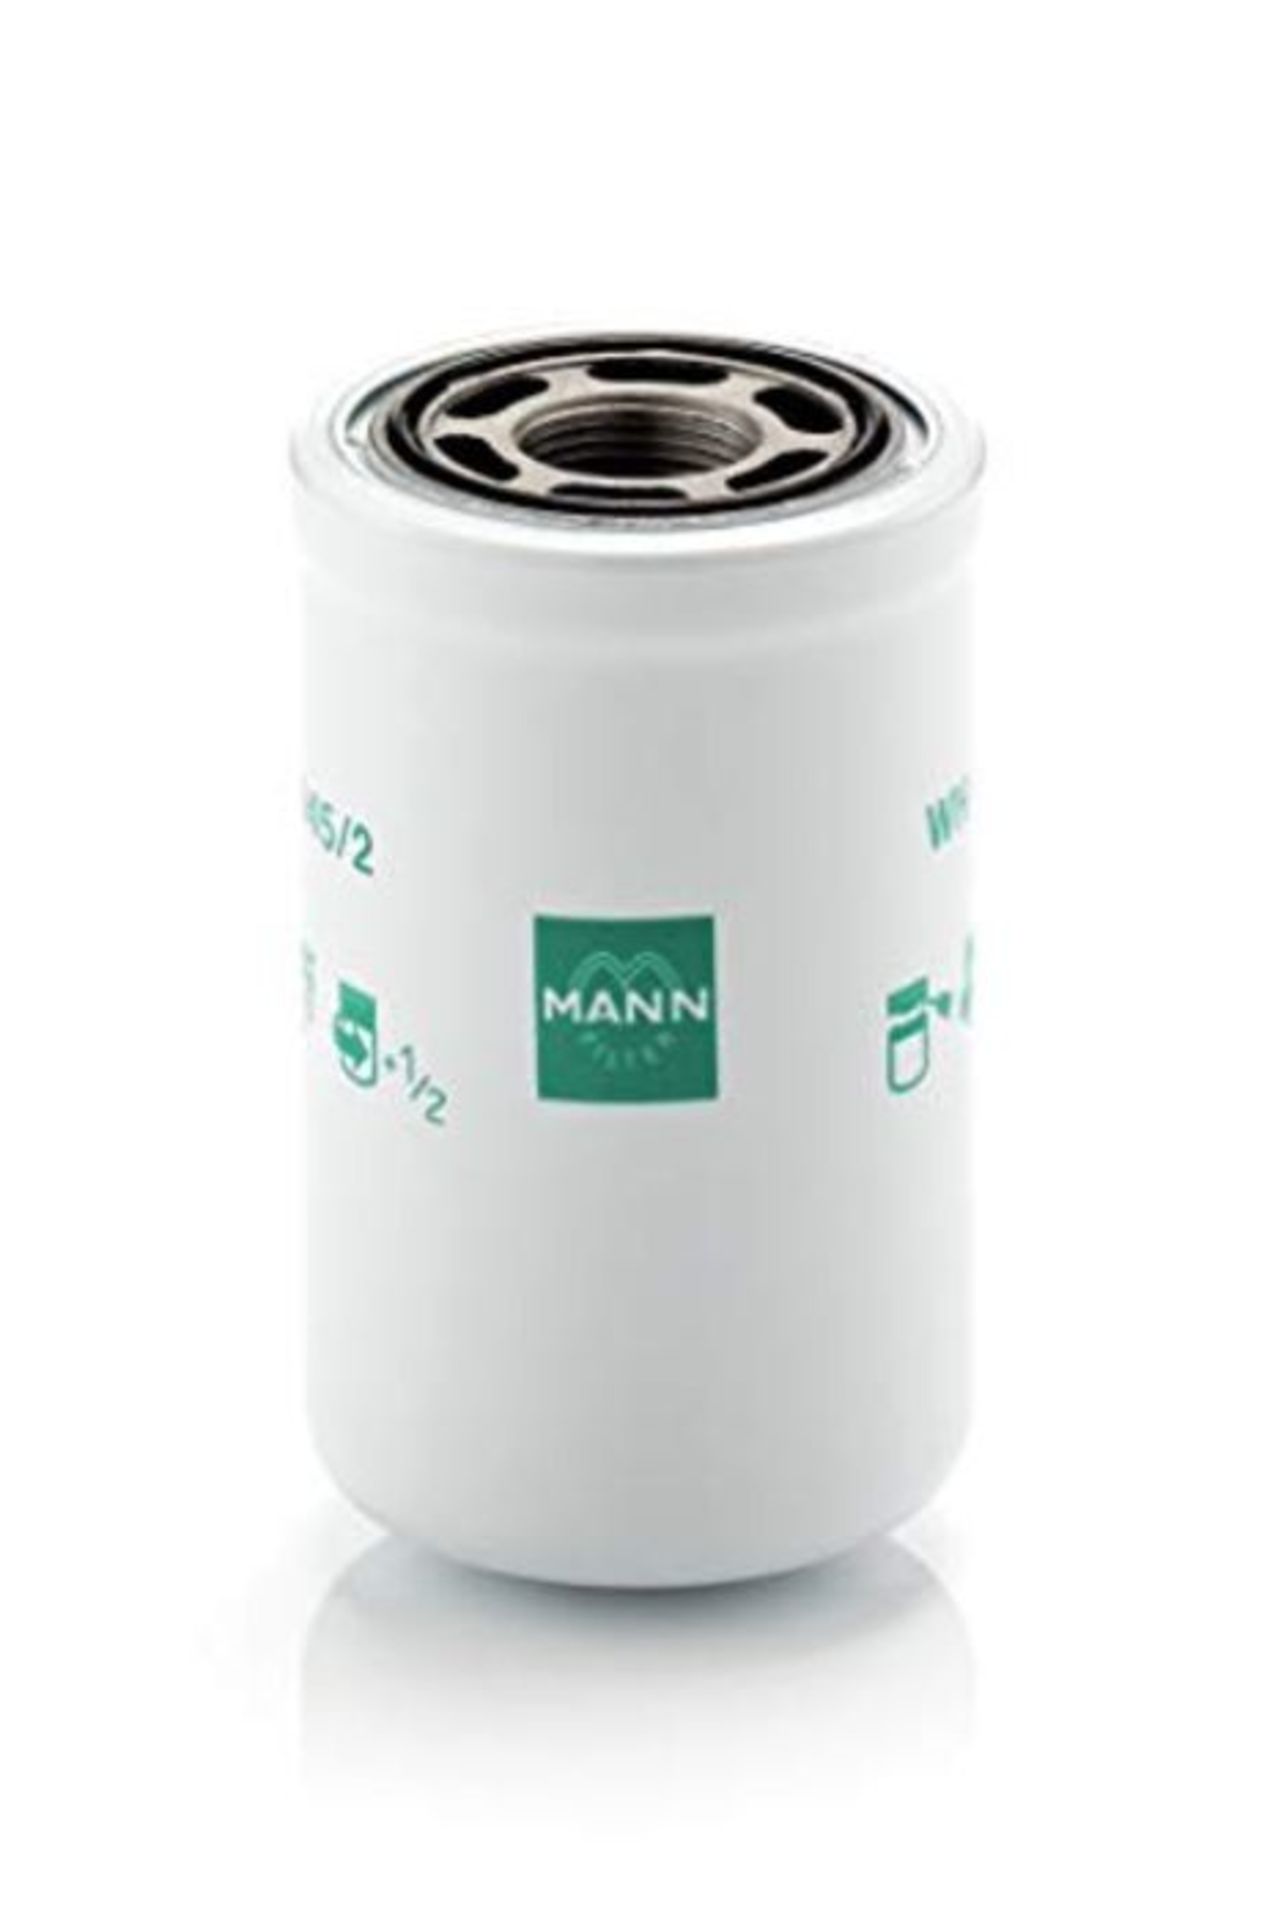 Original MANN-FILTER Oilfilter WH 945/2 - Hydraulic filter - For Utility Vehicles